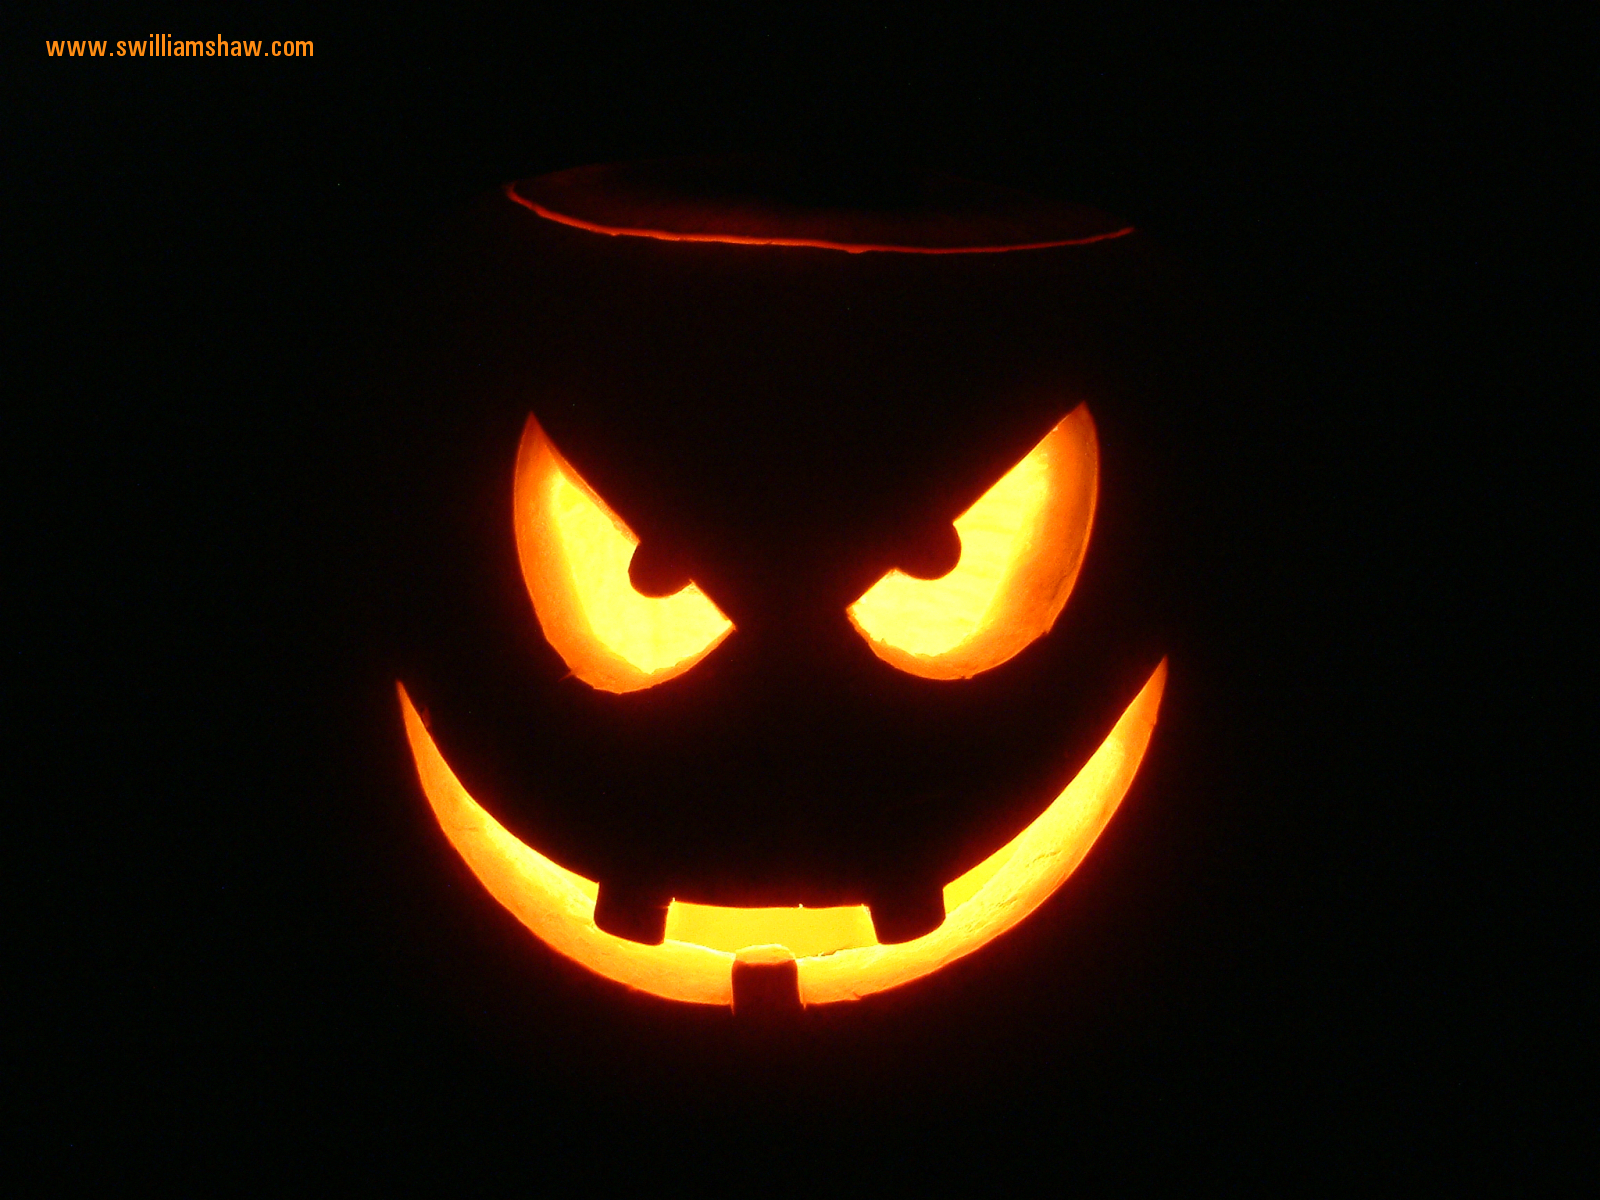 Smiling pumpkin with a mischievous expression